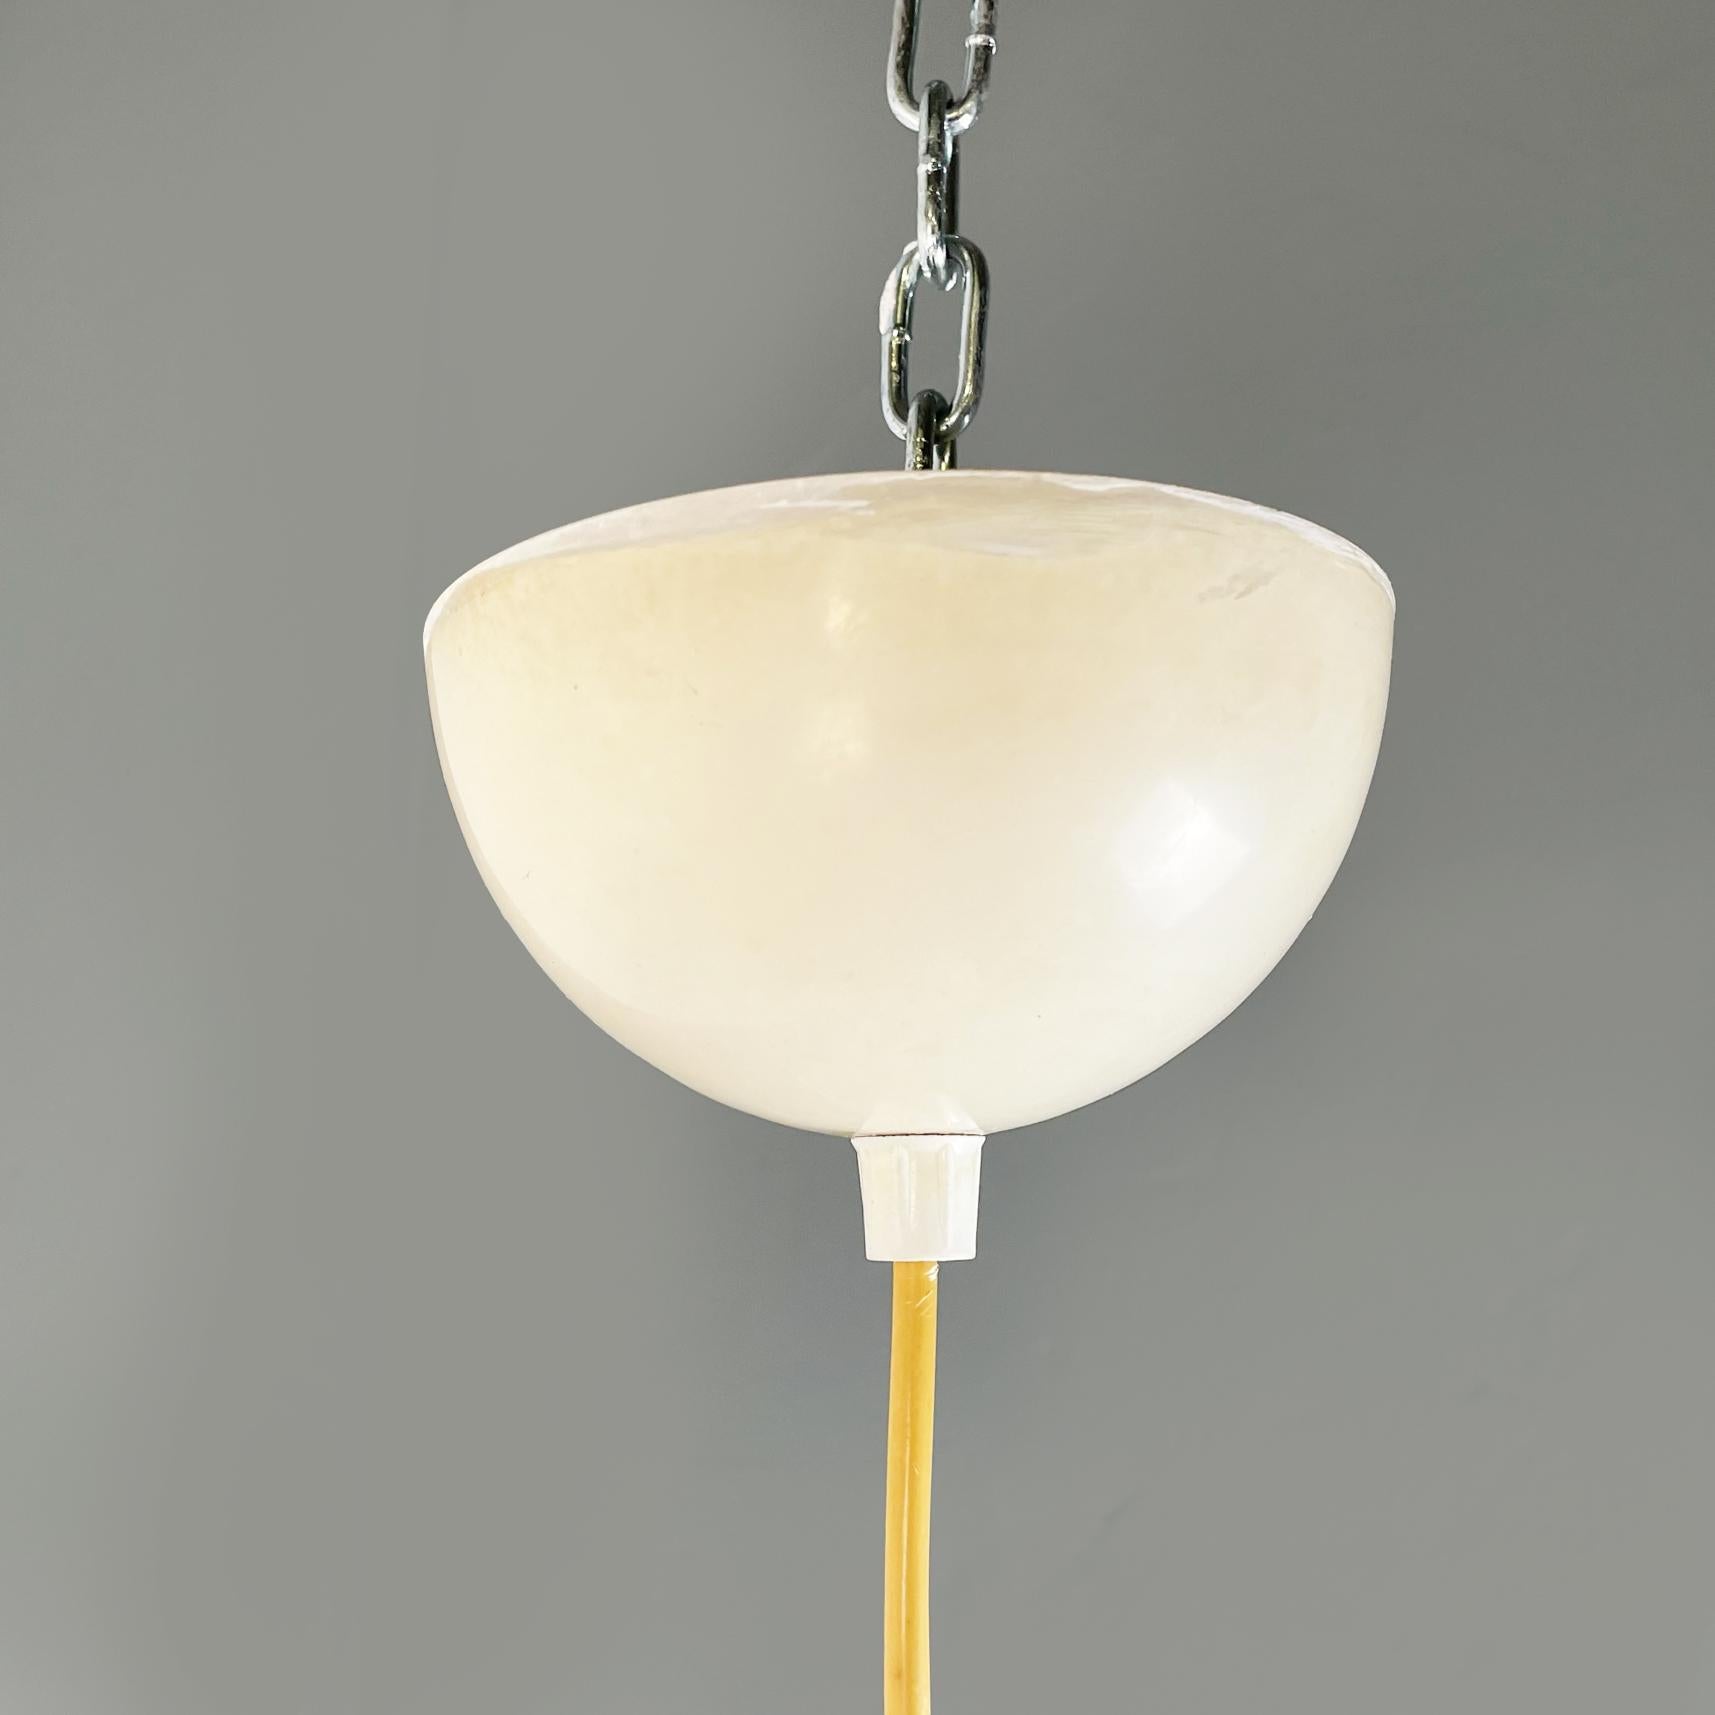 Italian Mid-Century Metal Suspension Lamp Relemme by Castiglioni for Flos, 1970s 4